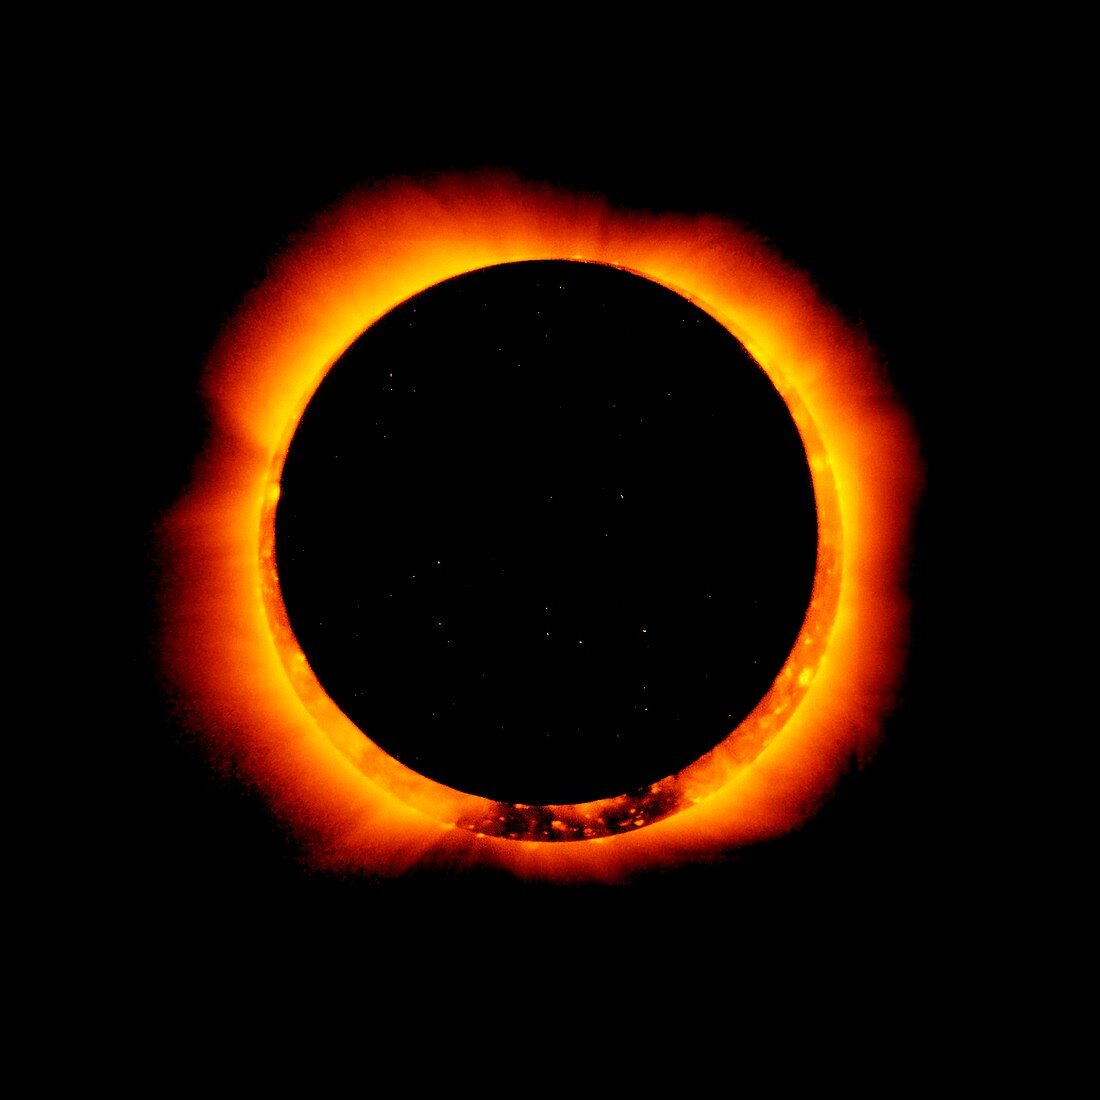 Total solar eclipse in X-rays, 20 May 2012